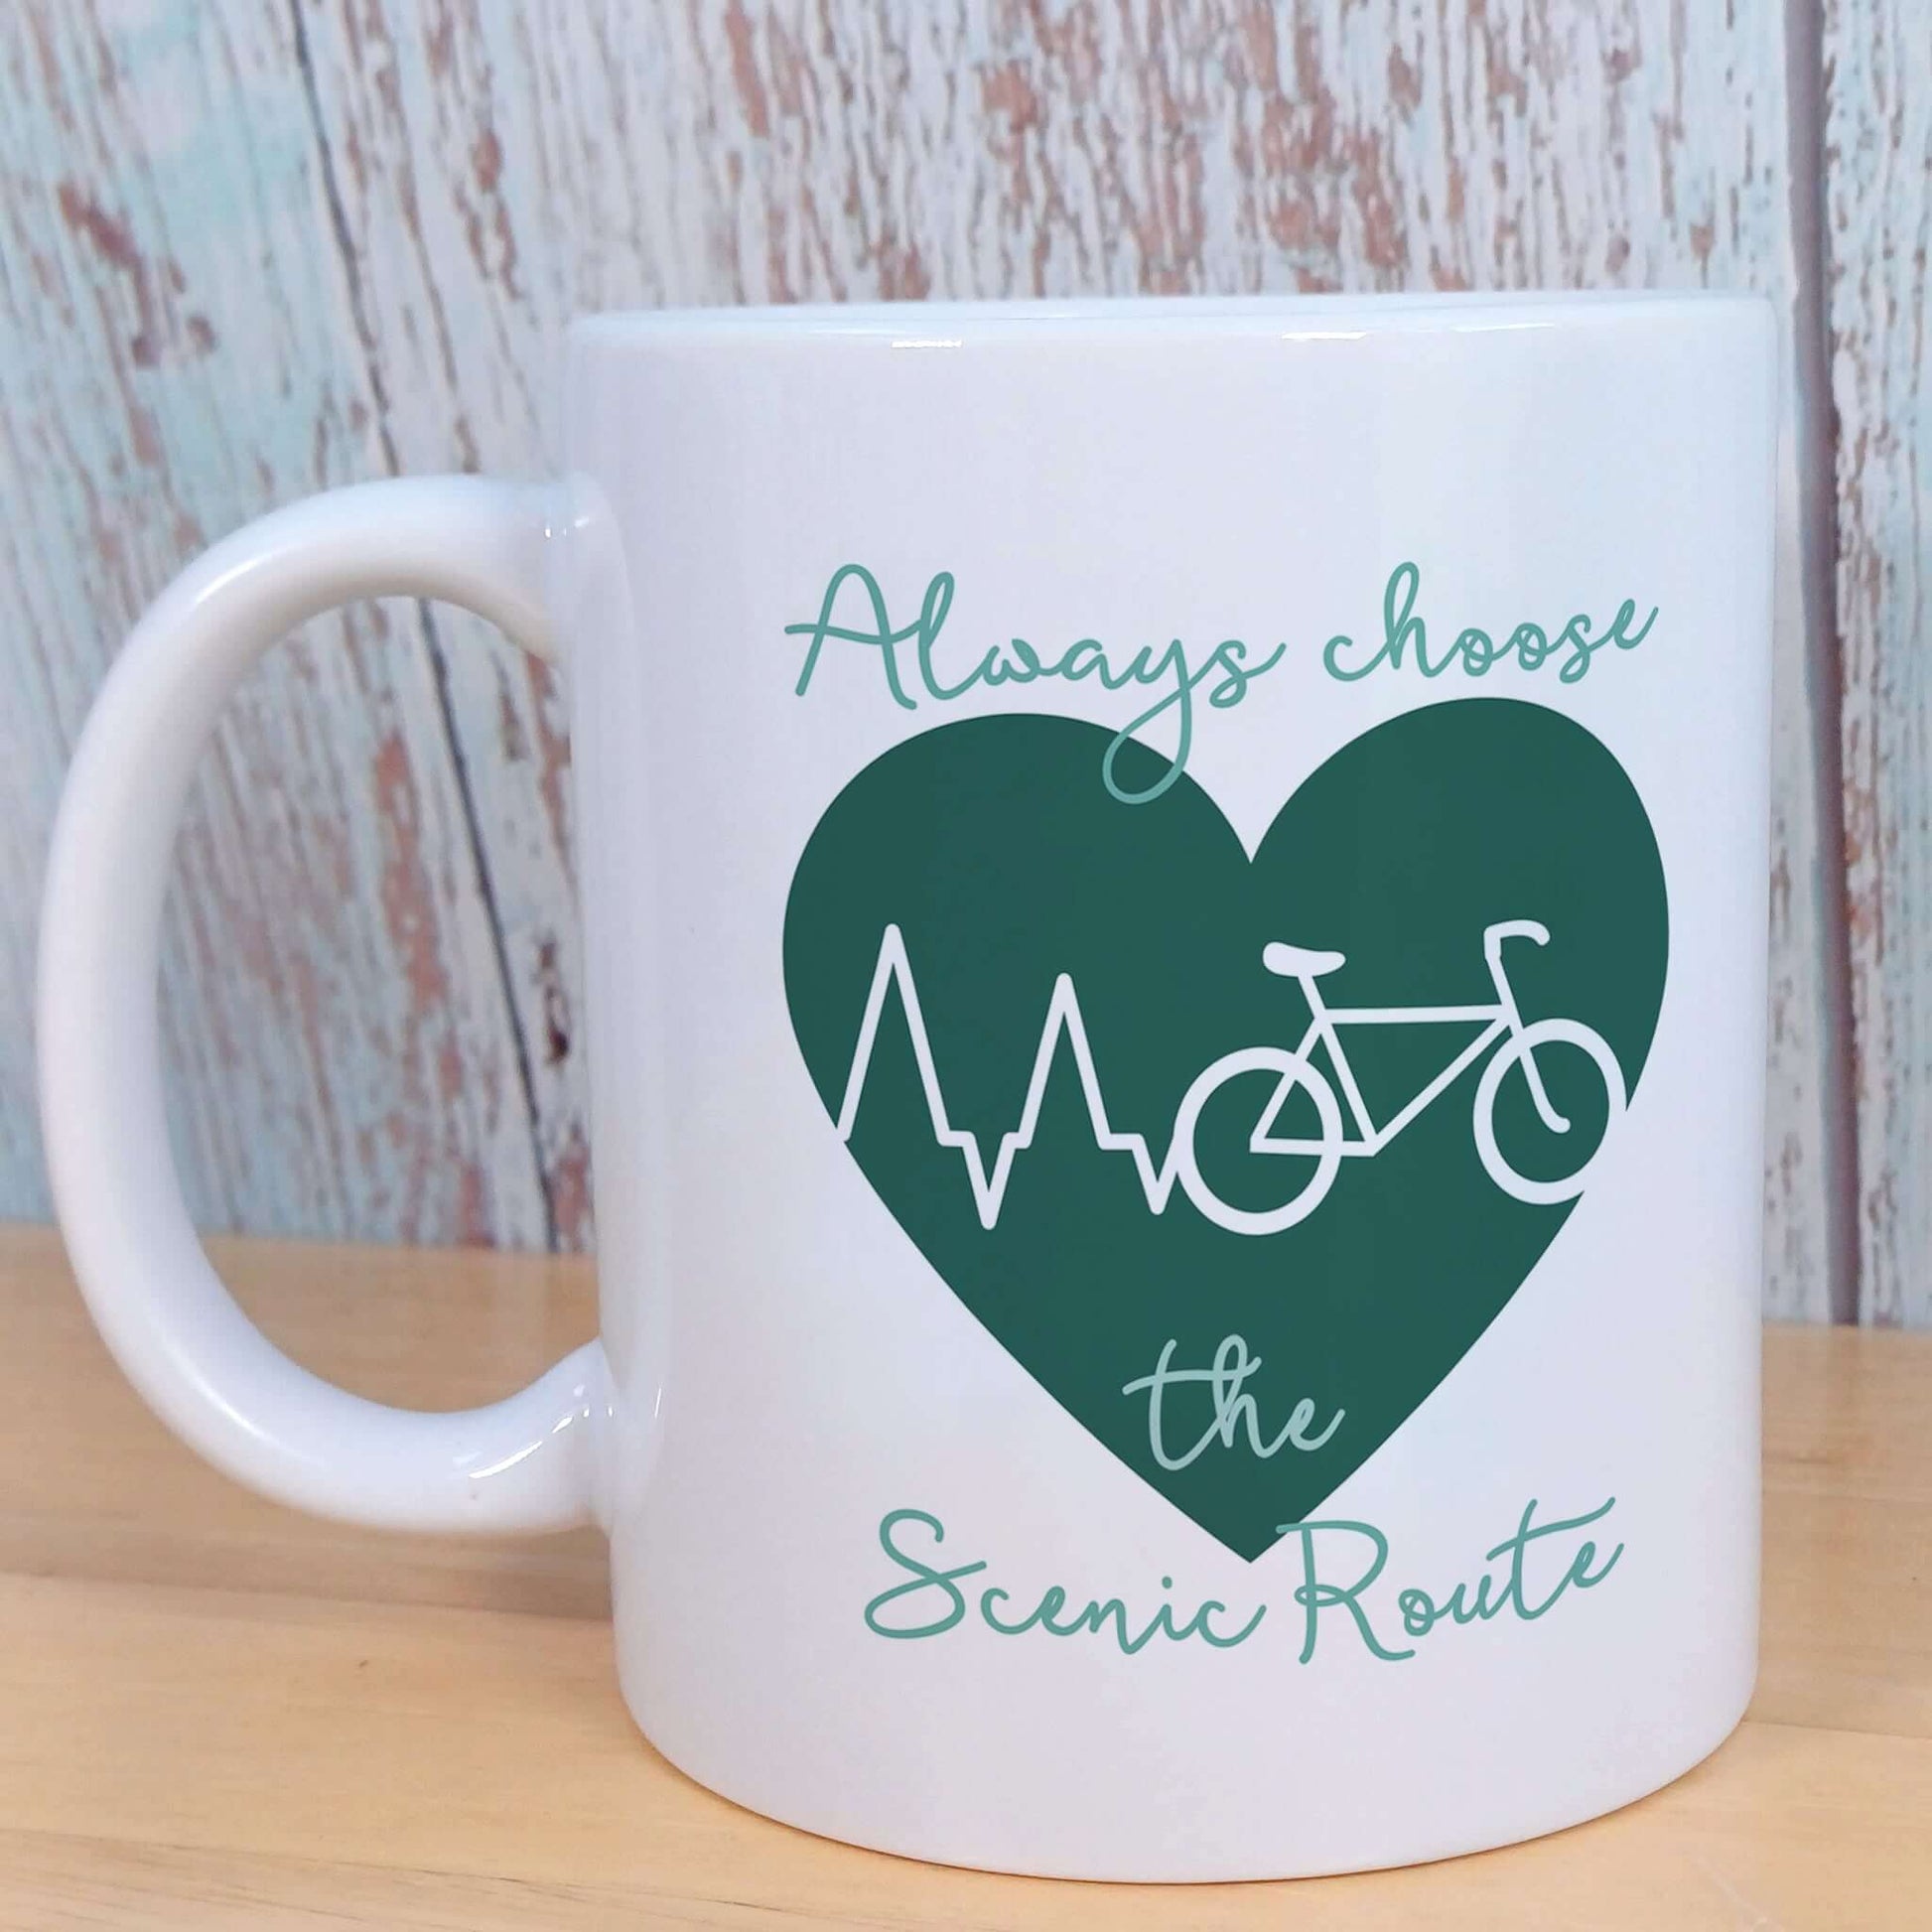 White Ceramic Gift Mug for Cycling Enthusiast. Cyclist theme Green Heart with white heartbeat across turning into white bicycle outline. Keen cyclist theme wording Always choose the Scenic Route in dark green handwriting style font